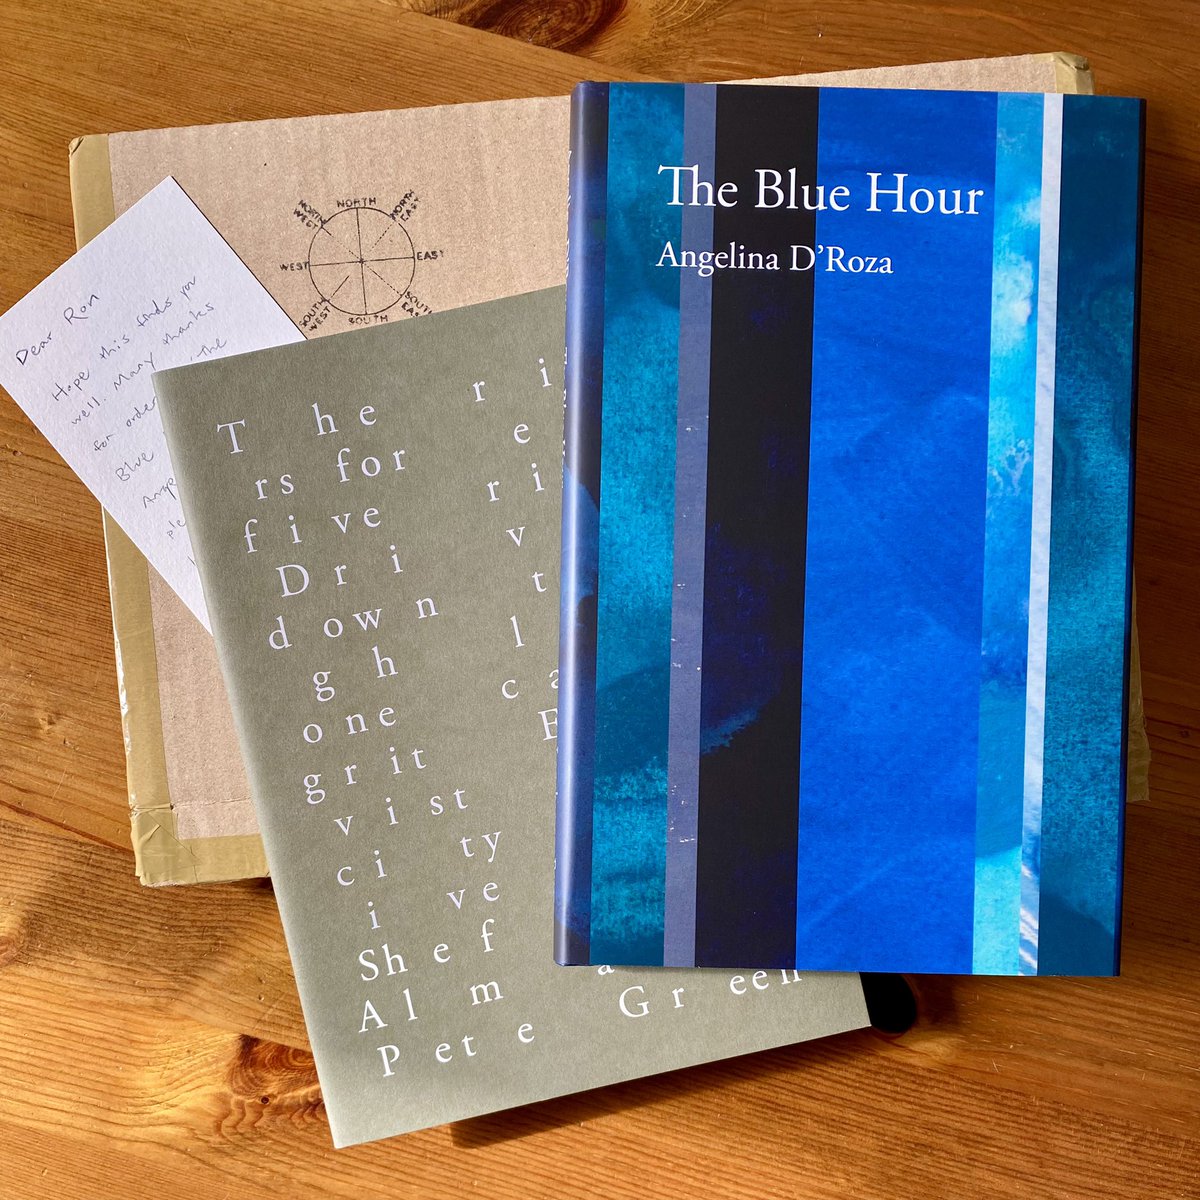 A speedy delivery from @LongbarrowPress. Beautifully packaged as usual, lovely quality publications. Can’t wait to start reading. Thanks Brian.